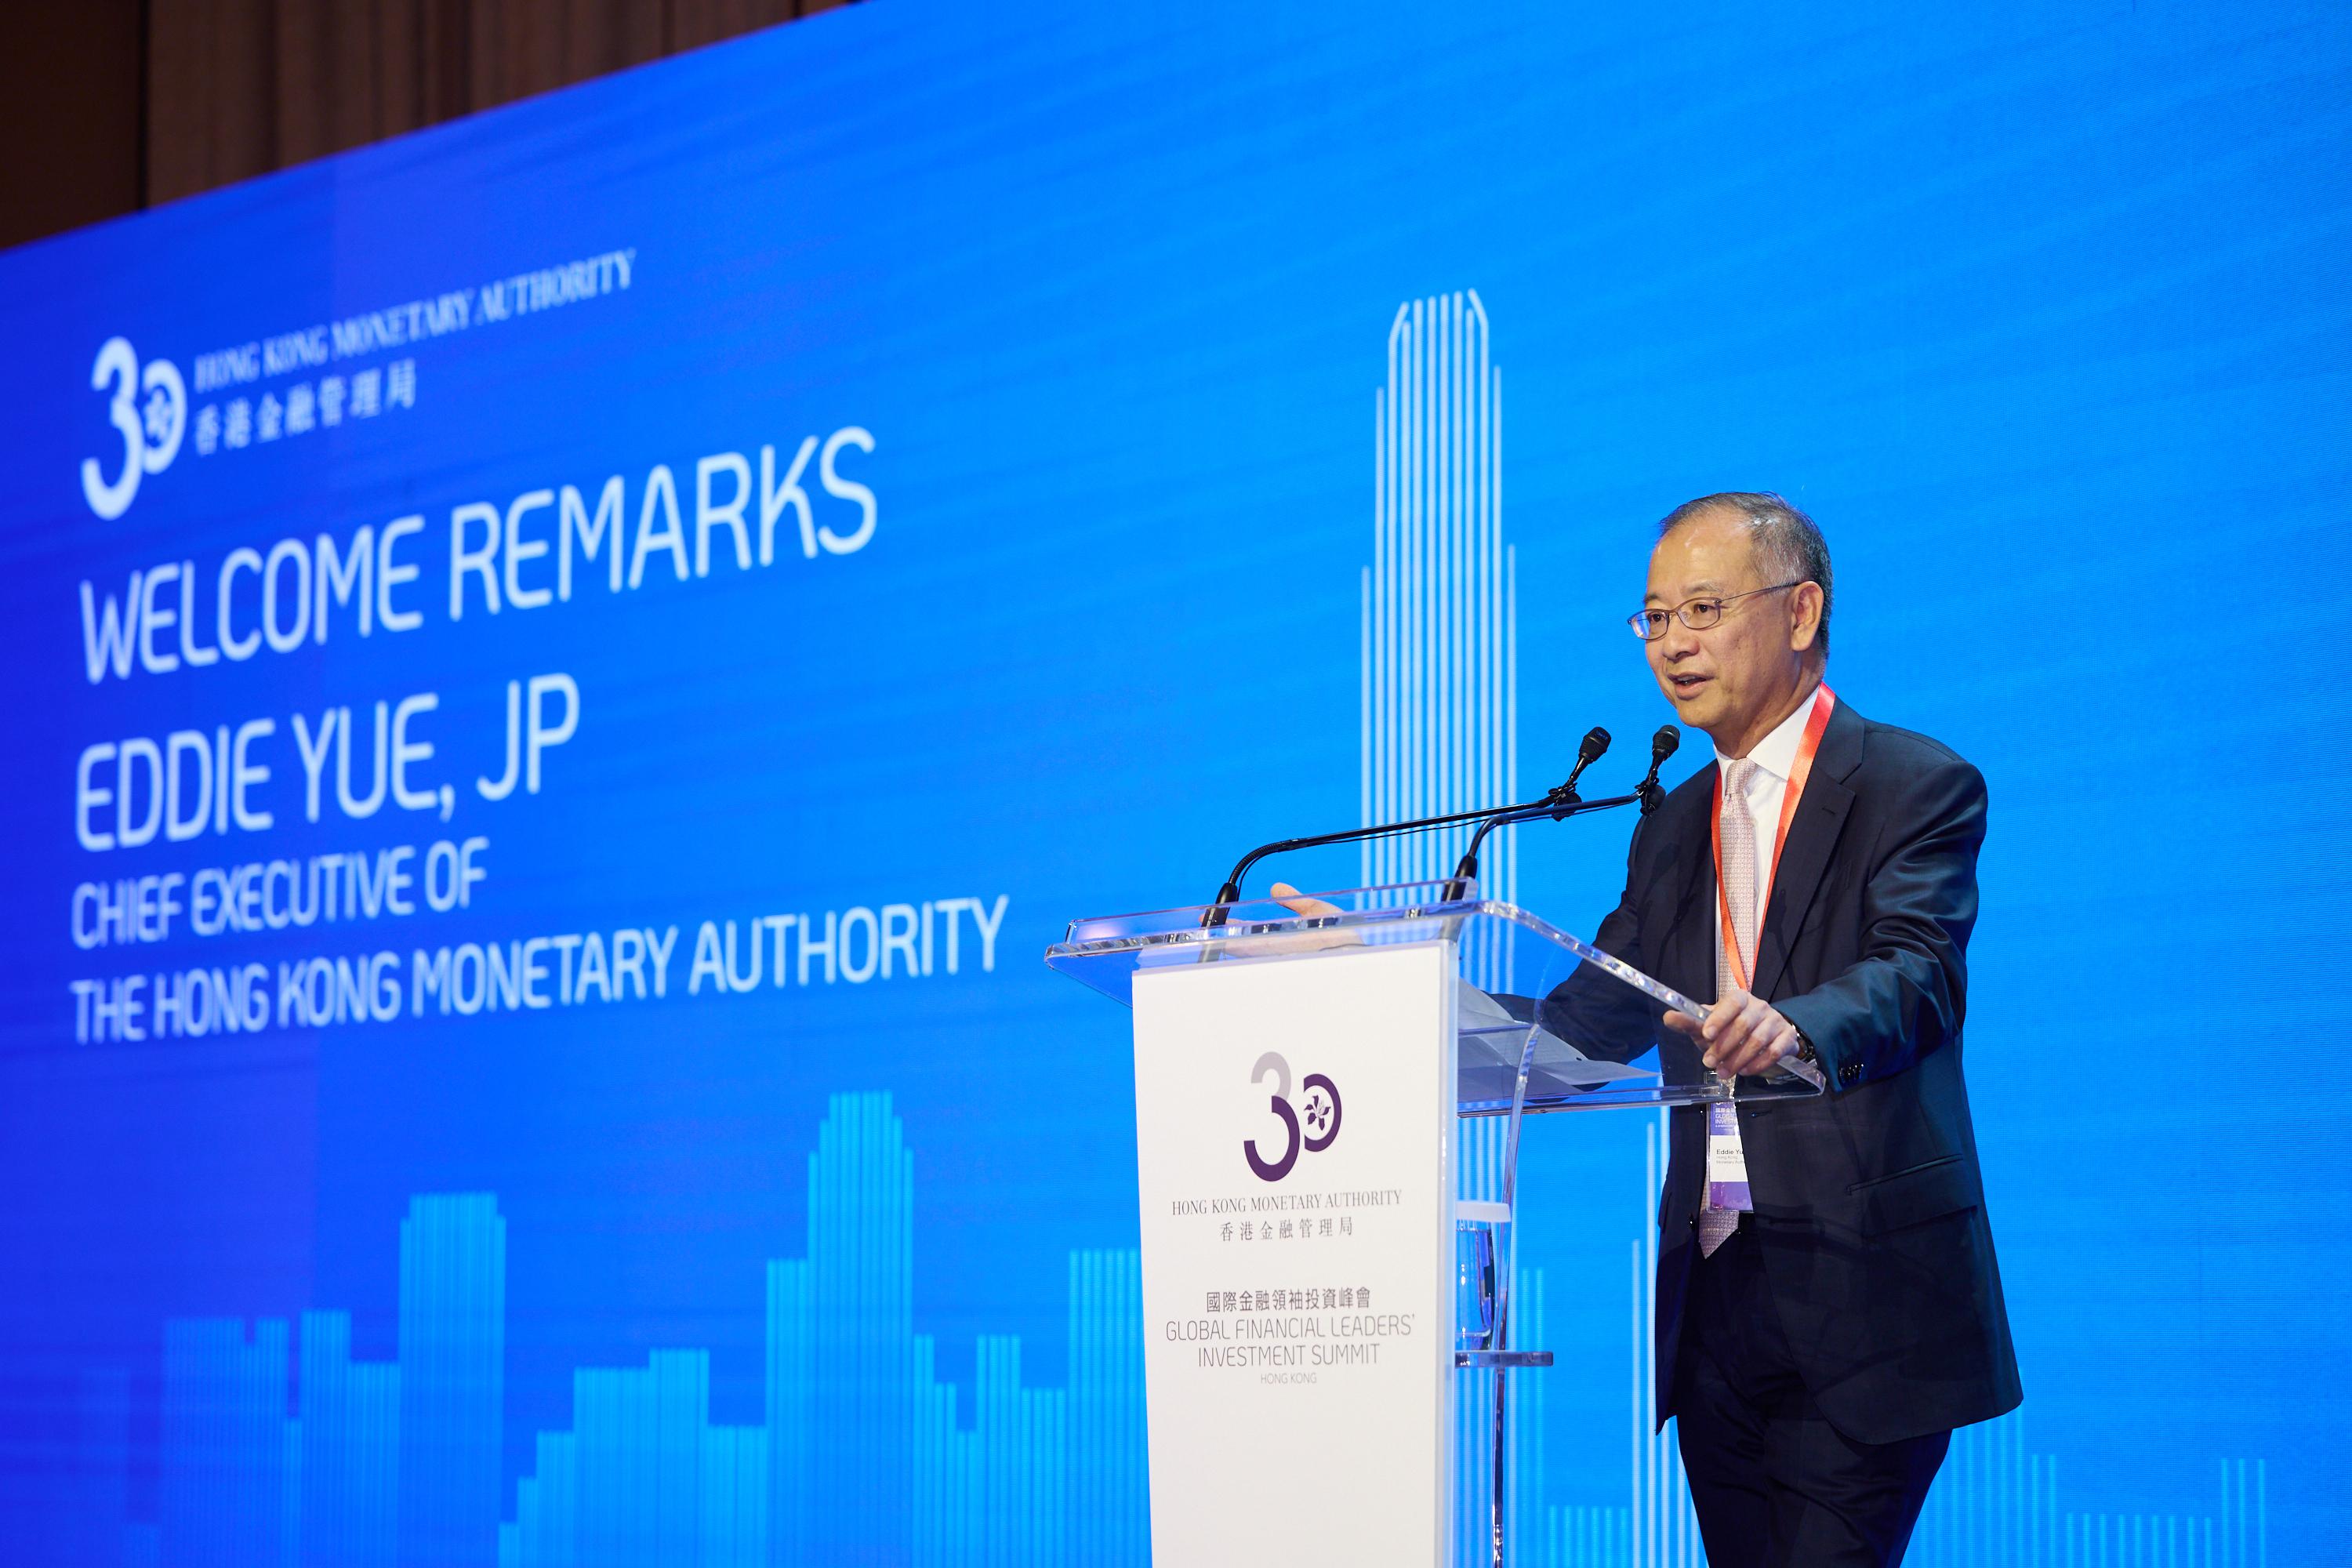 The Chief Executive of the Hong Kong Monetary Authority, Mr Eddie Yue, delivers welcome remarks at the Global Financial Leaders' Investment Summit today (November 7). 